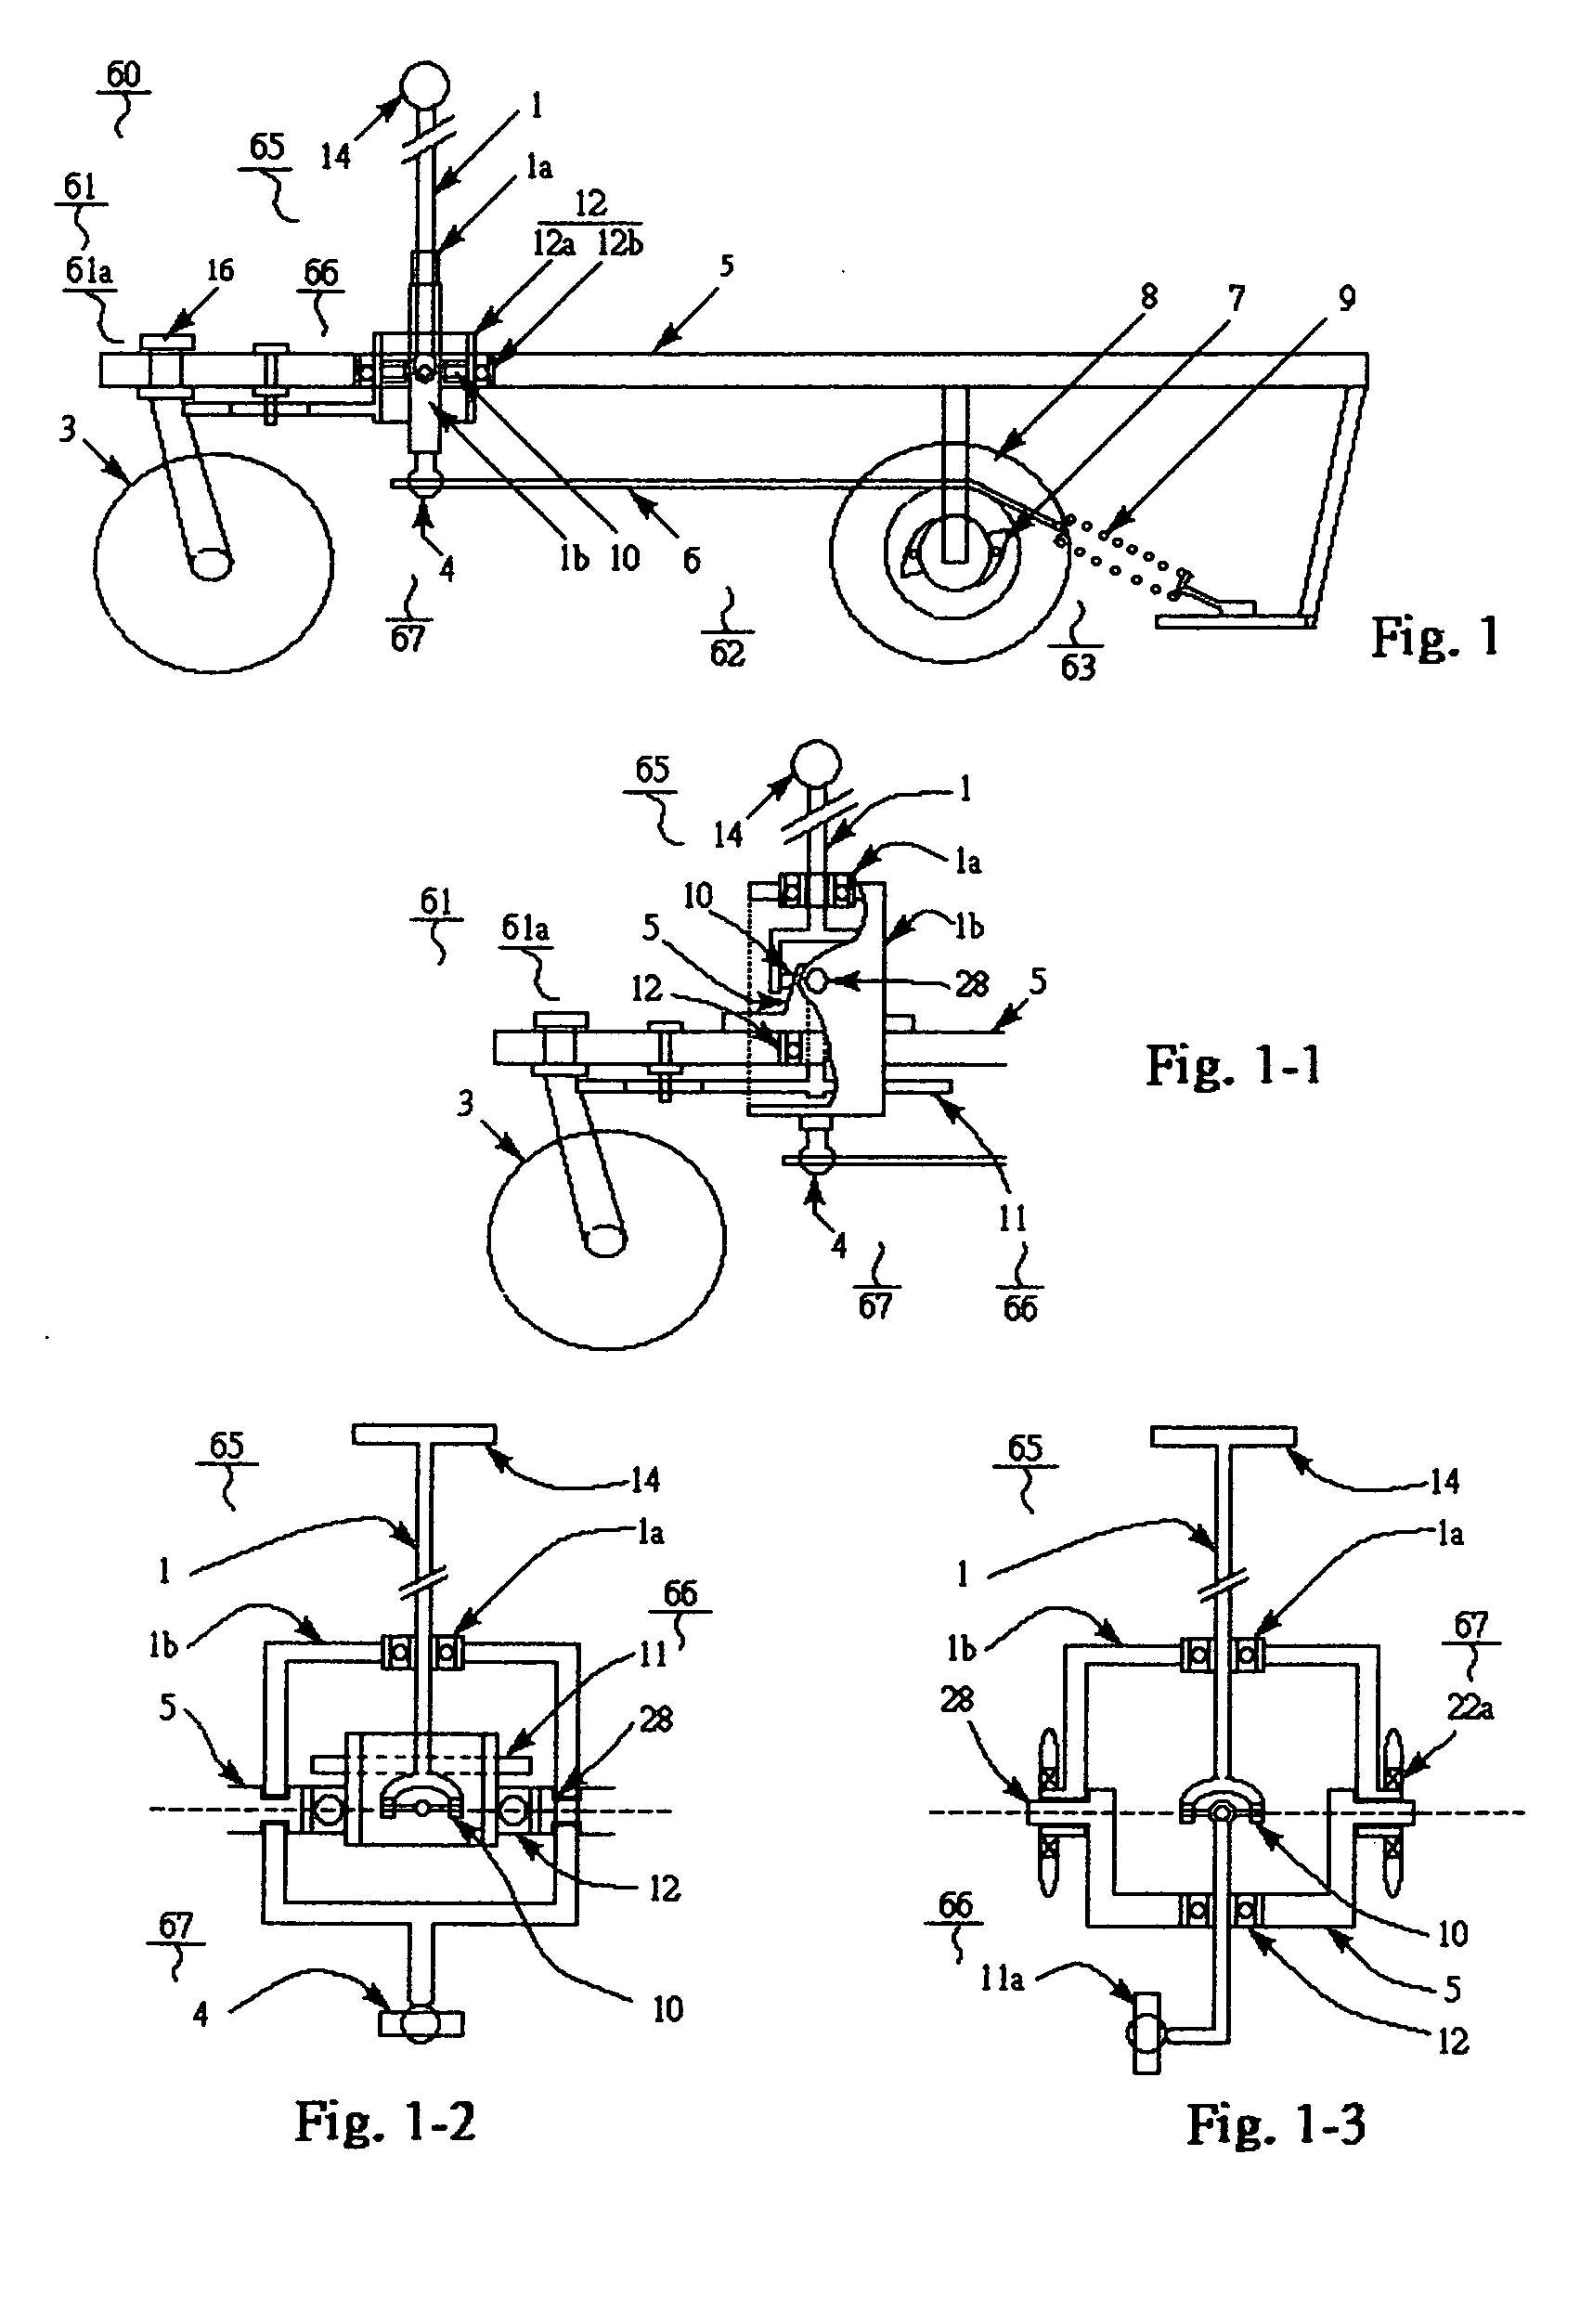 Steering Mechanism for a Push and Pull Vehicle